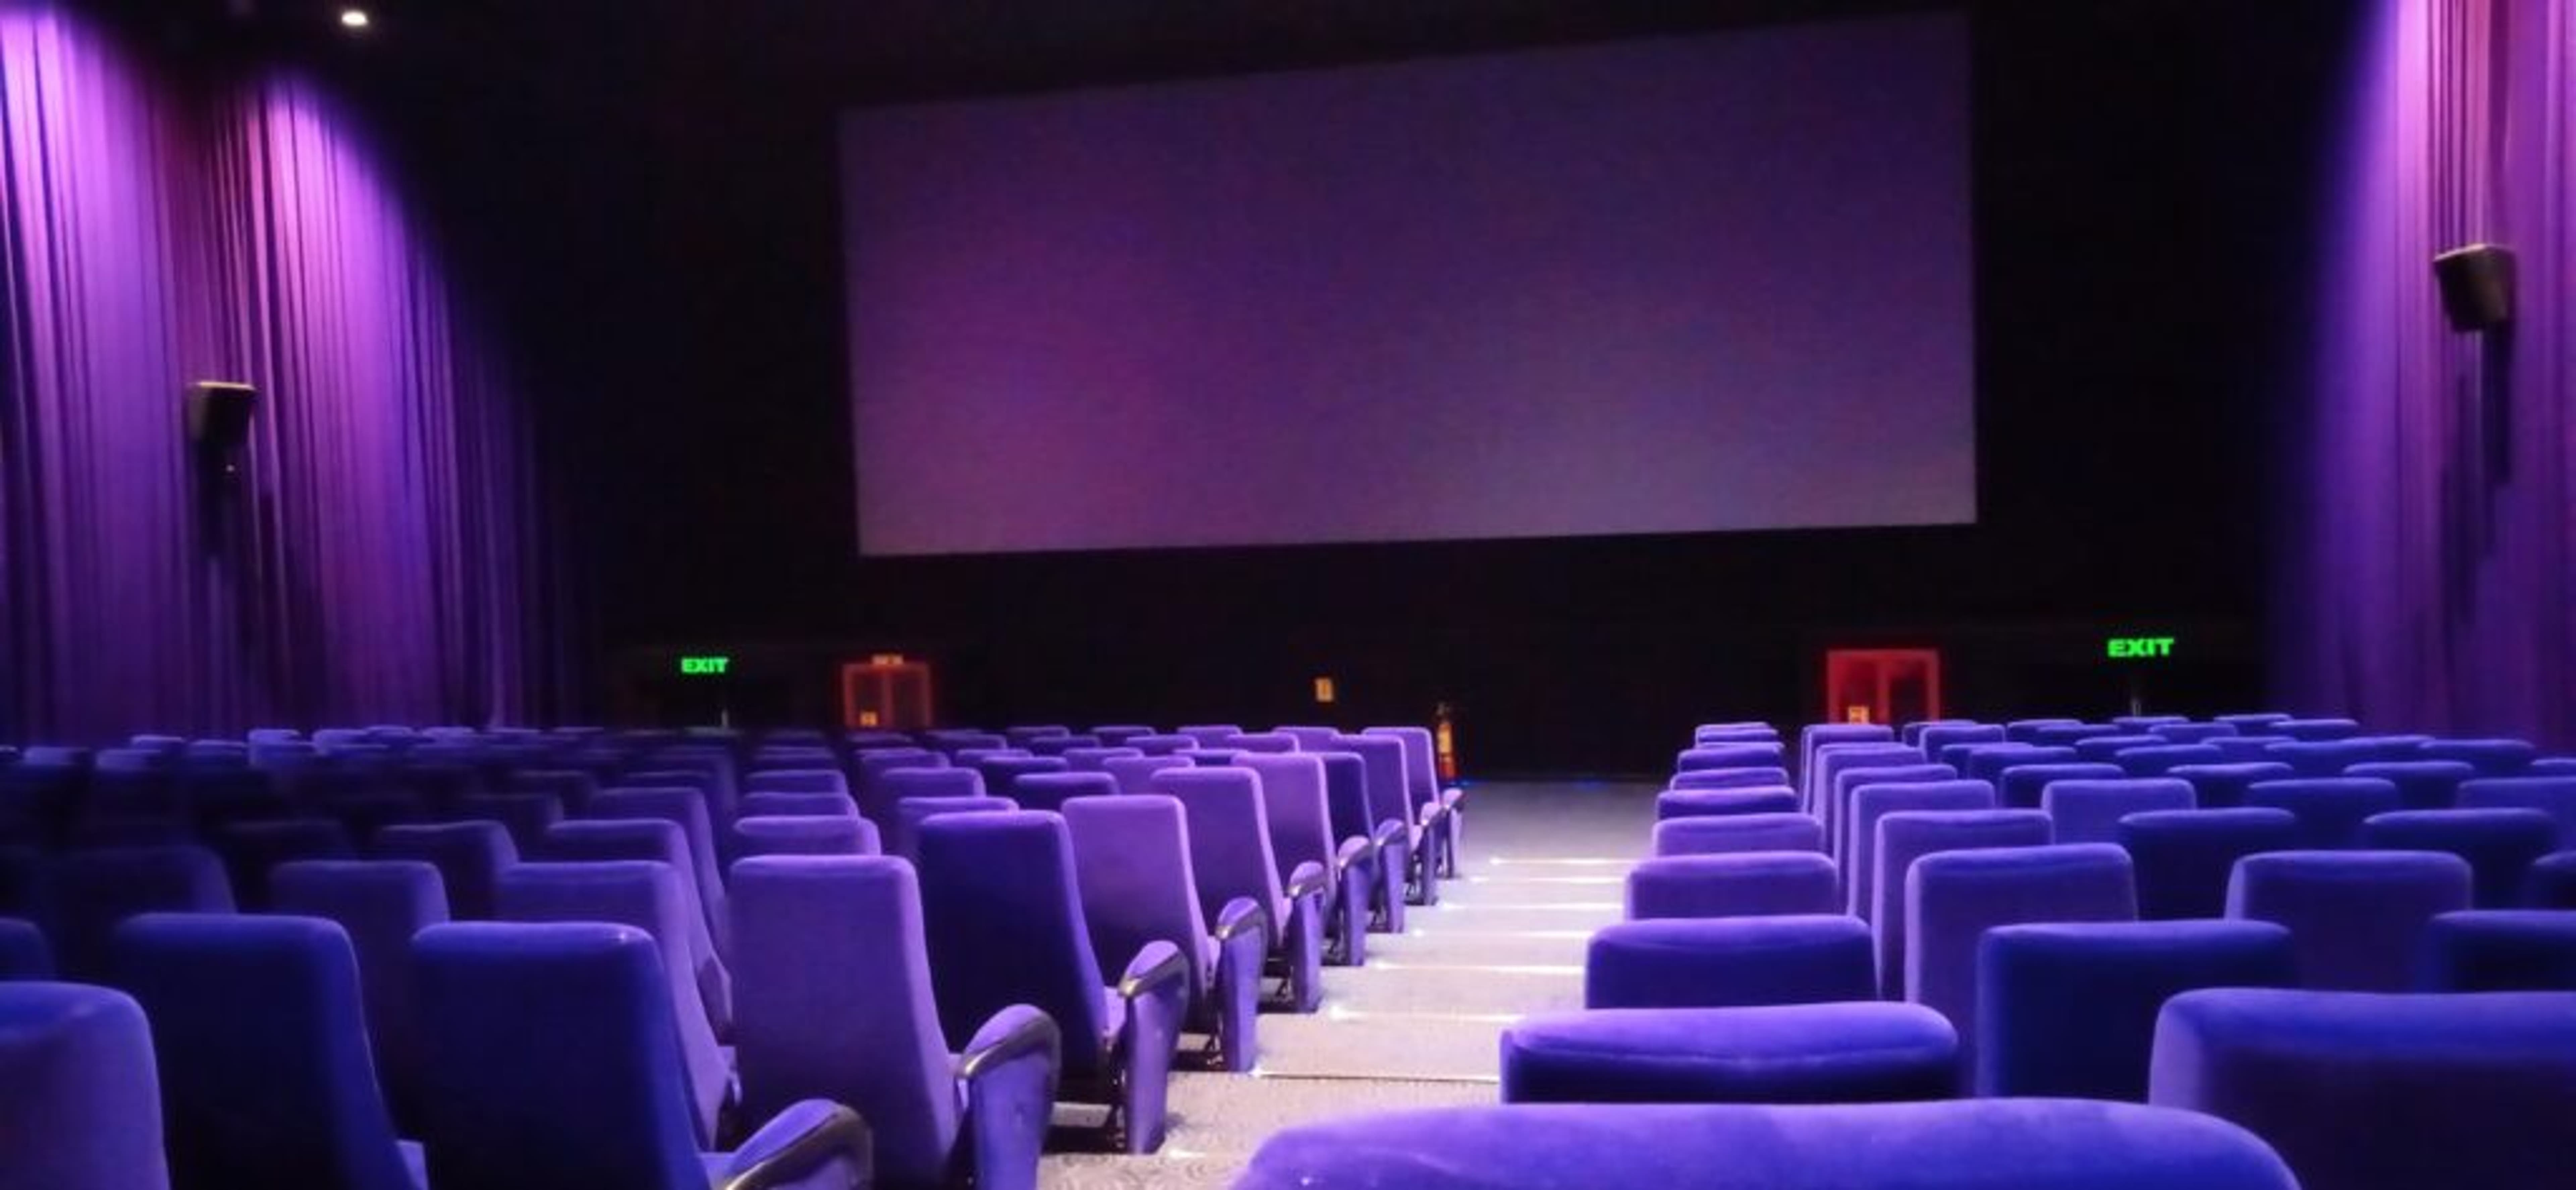 PVR Inox Posts Larger Q1 Loss, But Analysts Have High Hopes